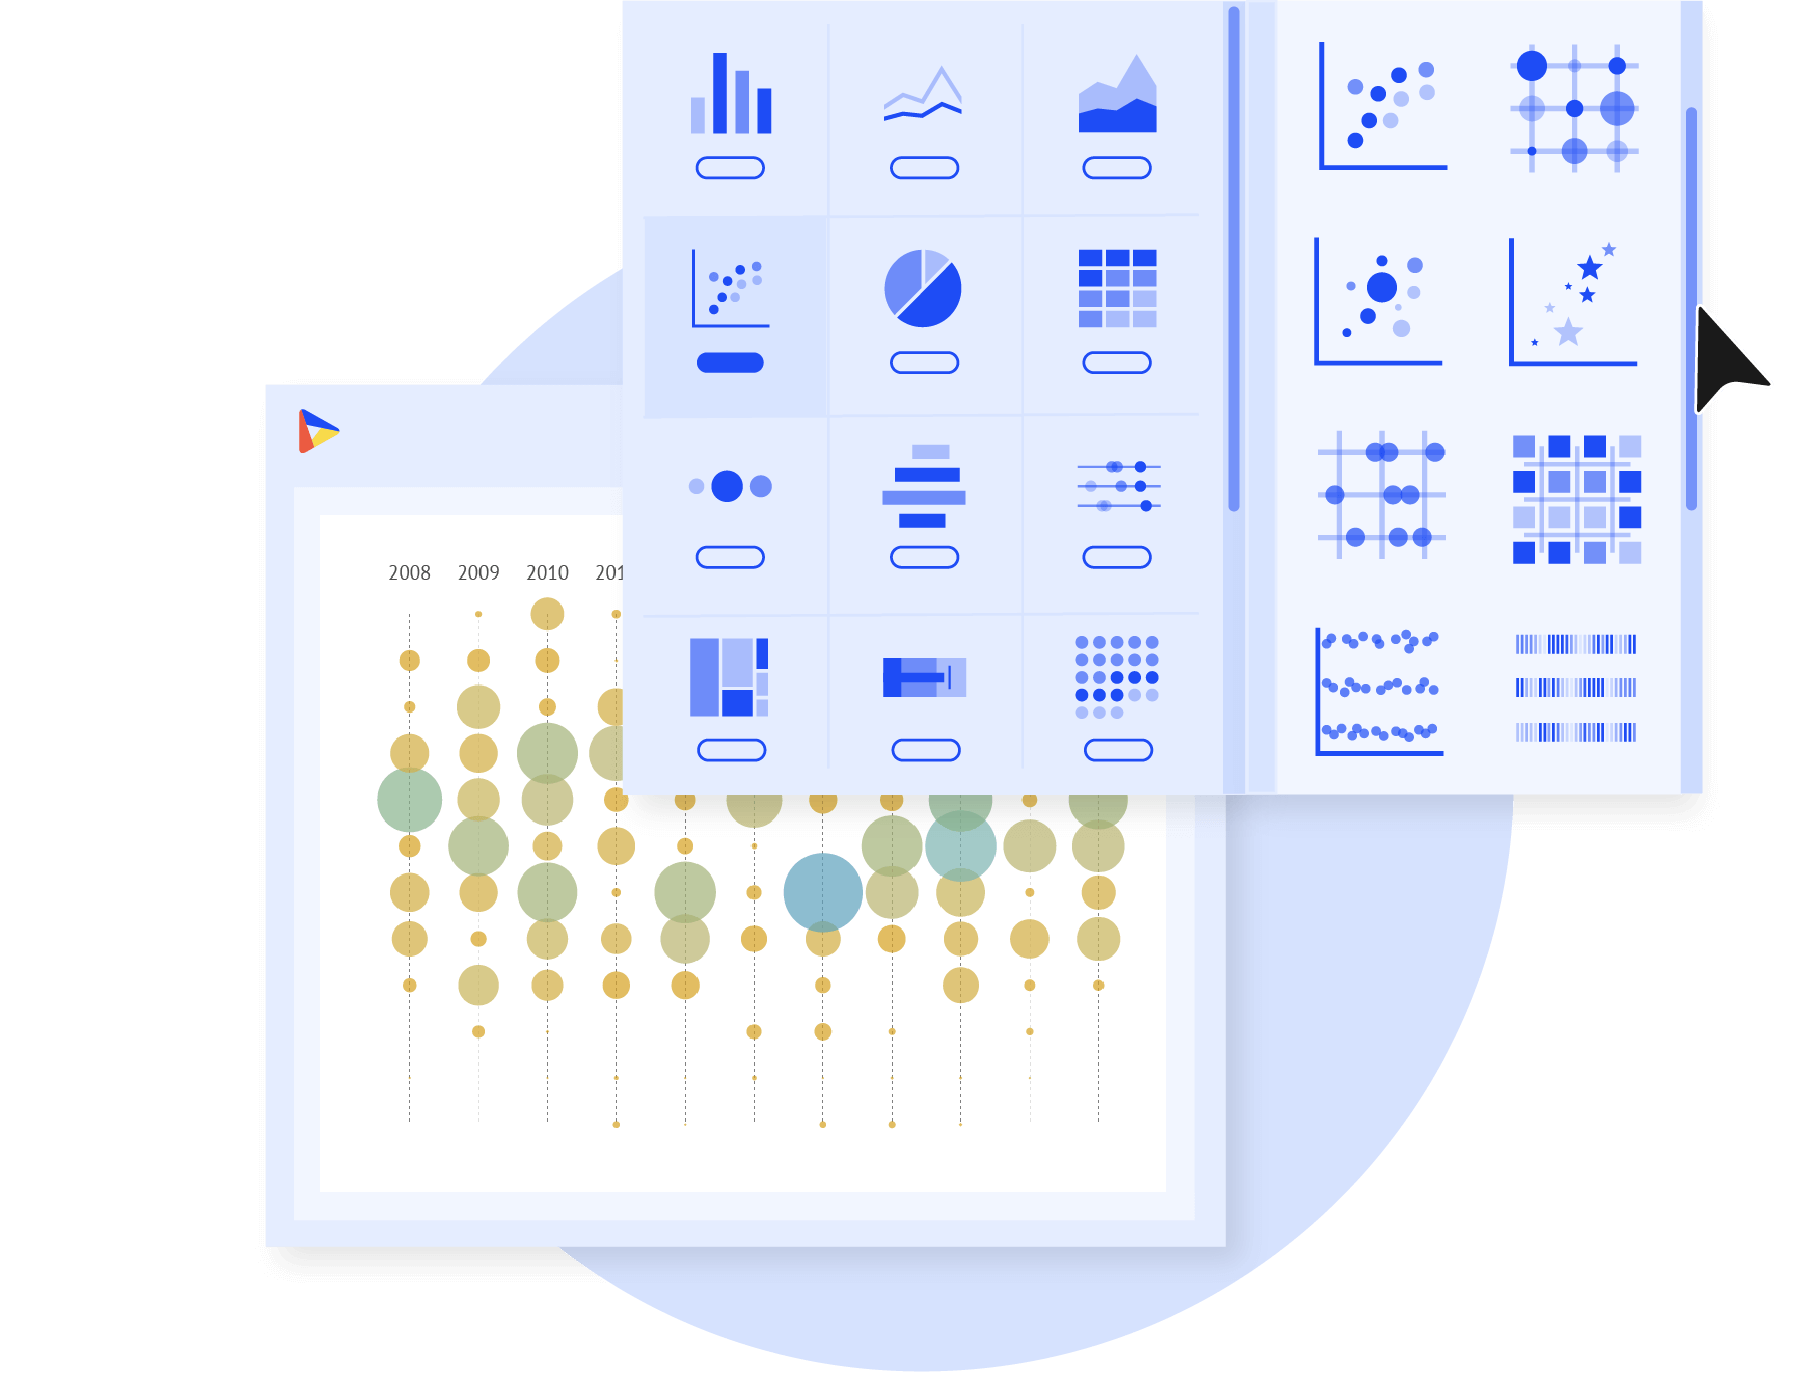 130+ chart templates - Choose from a growing collection of carefully crafted chart types to get you started faster. Edit and optimize them to the smallest detail and meet your design requirements.